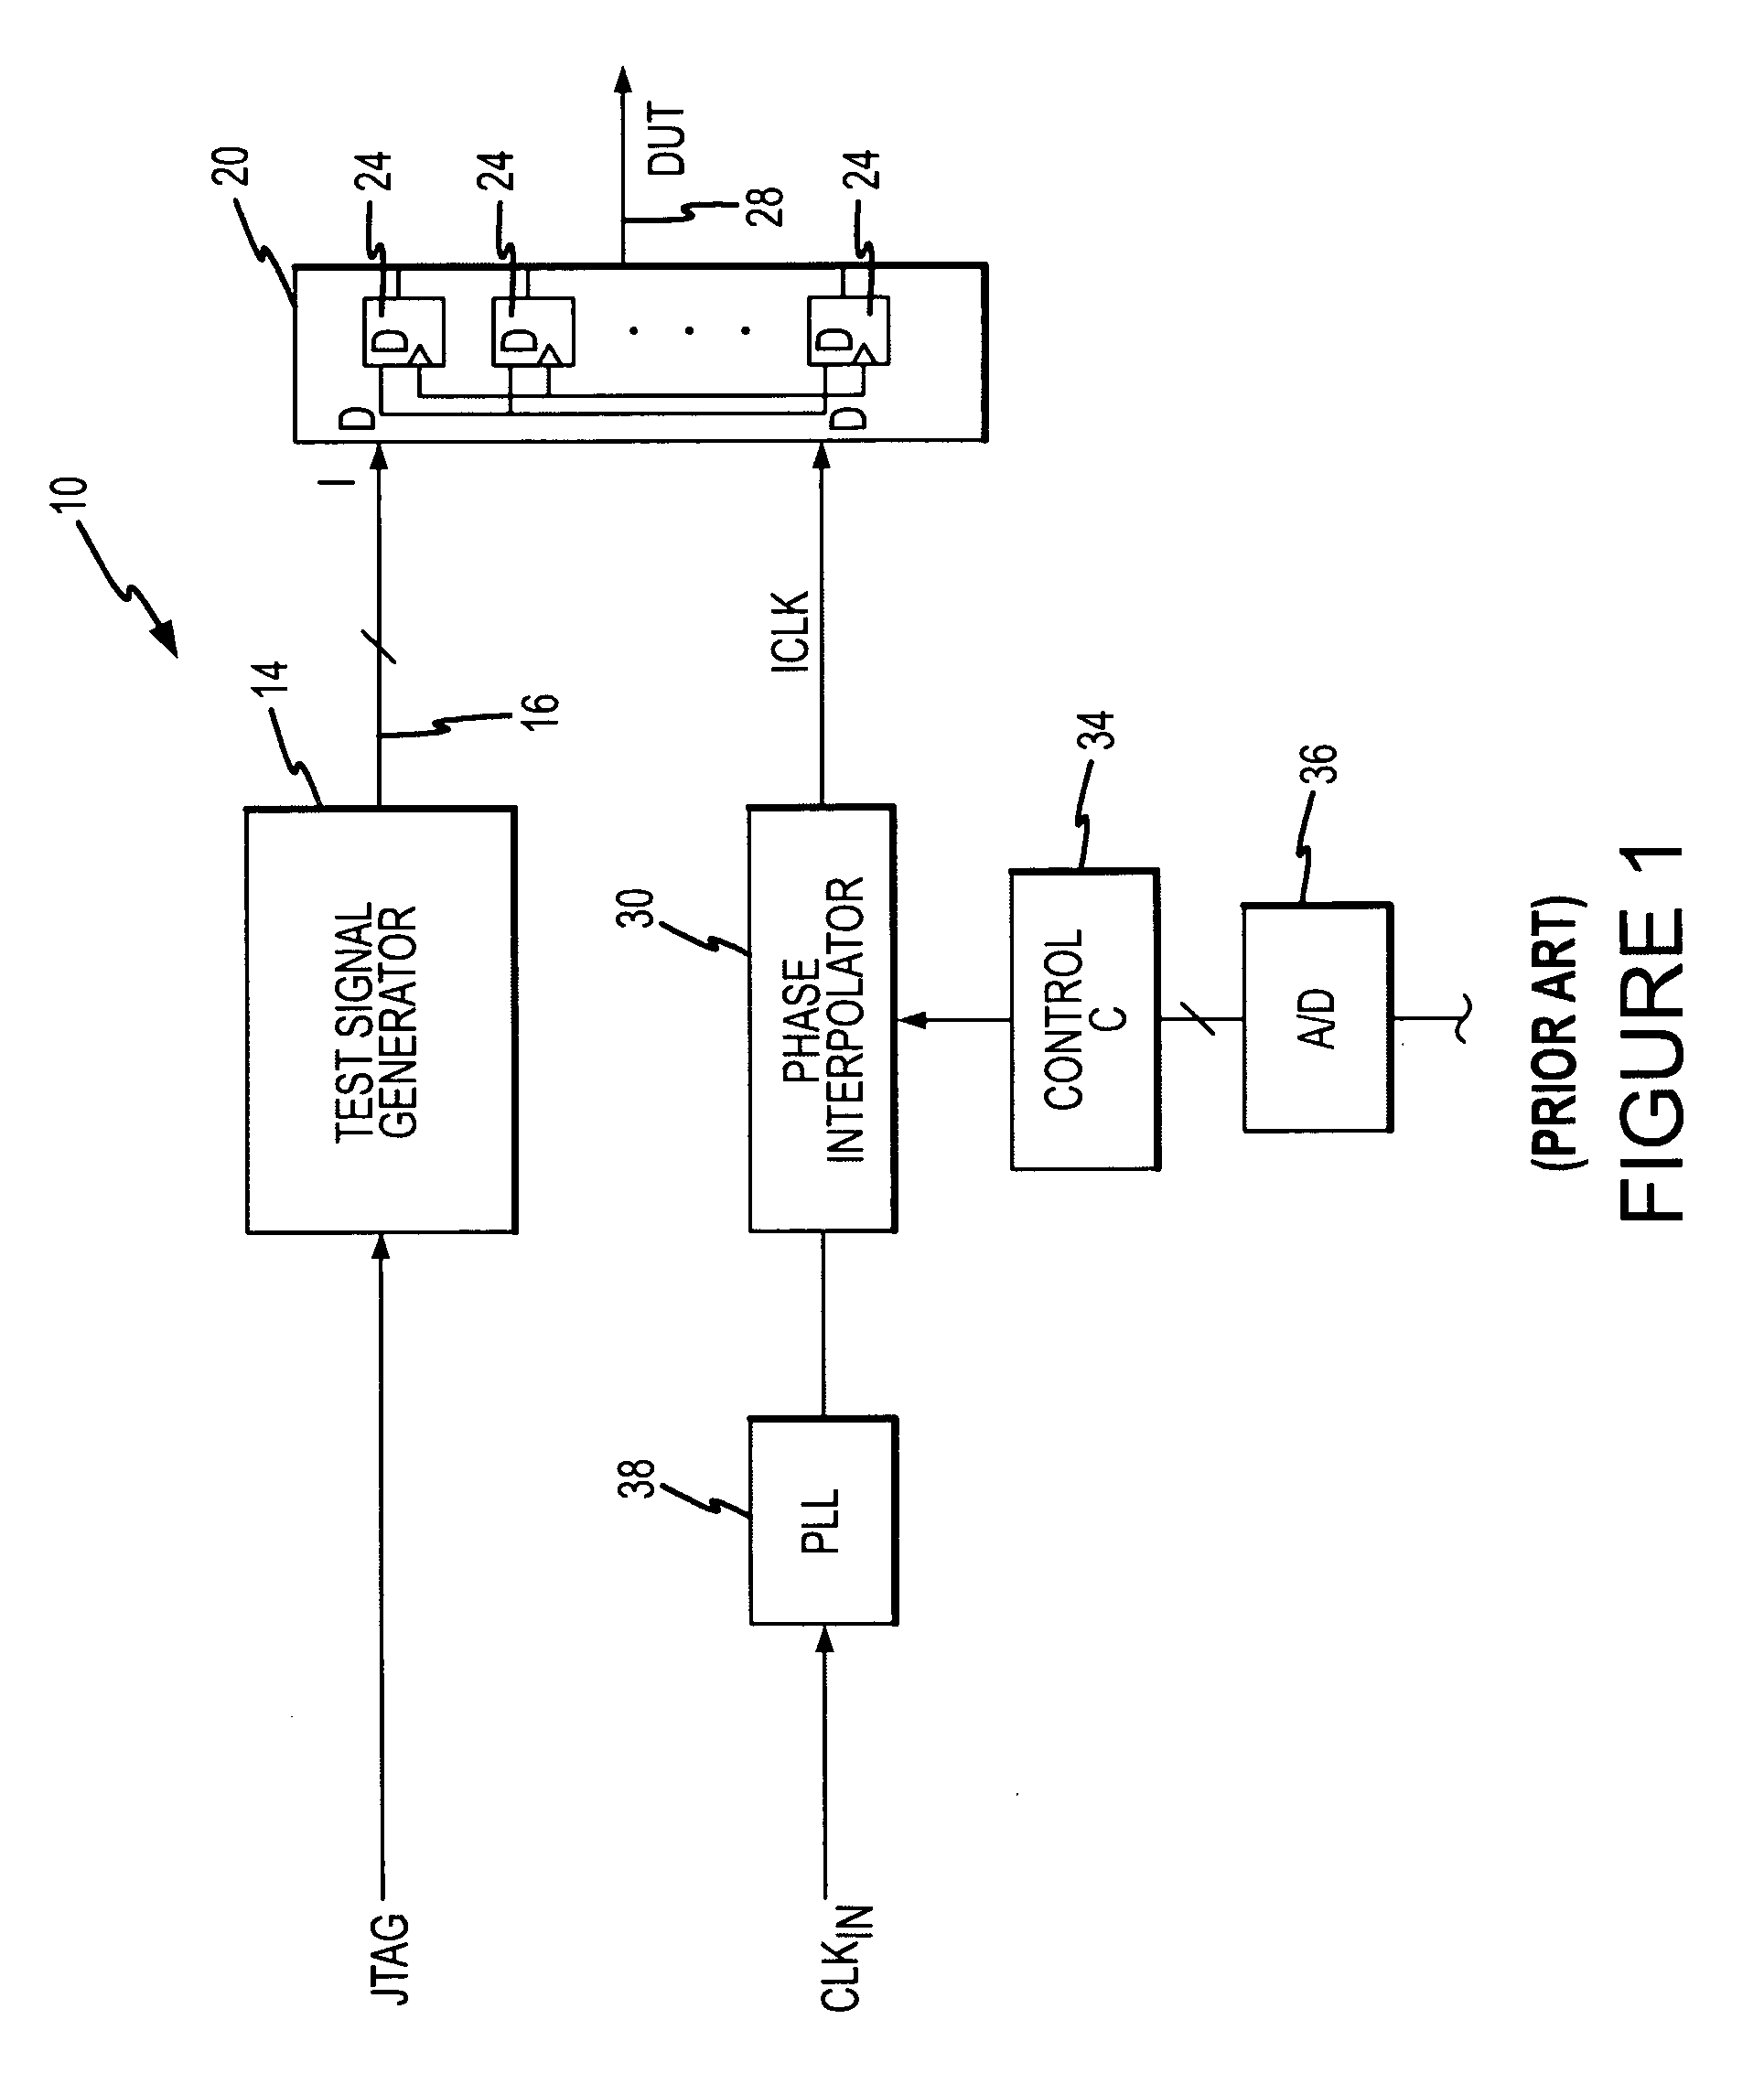 System and method for injecting phase jitter into integrated circuit test signals